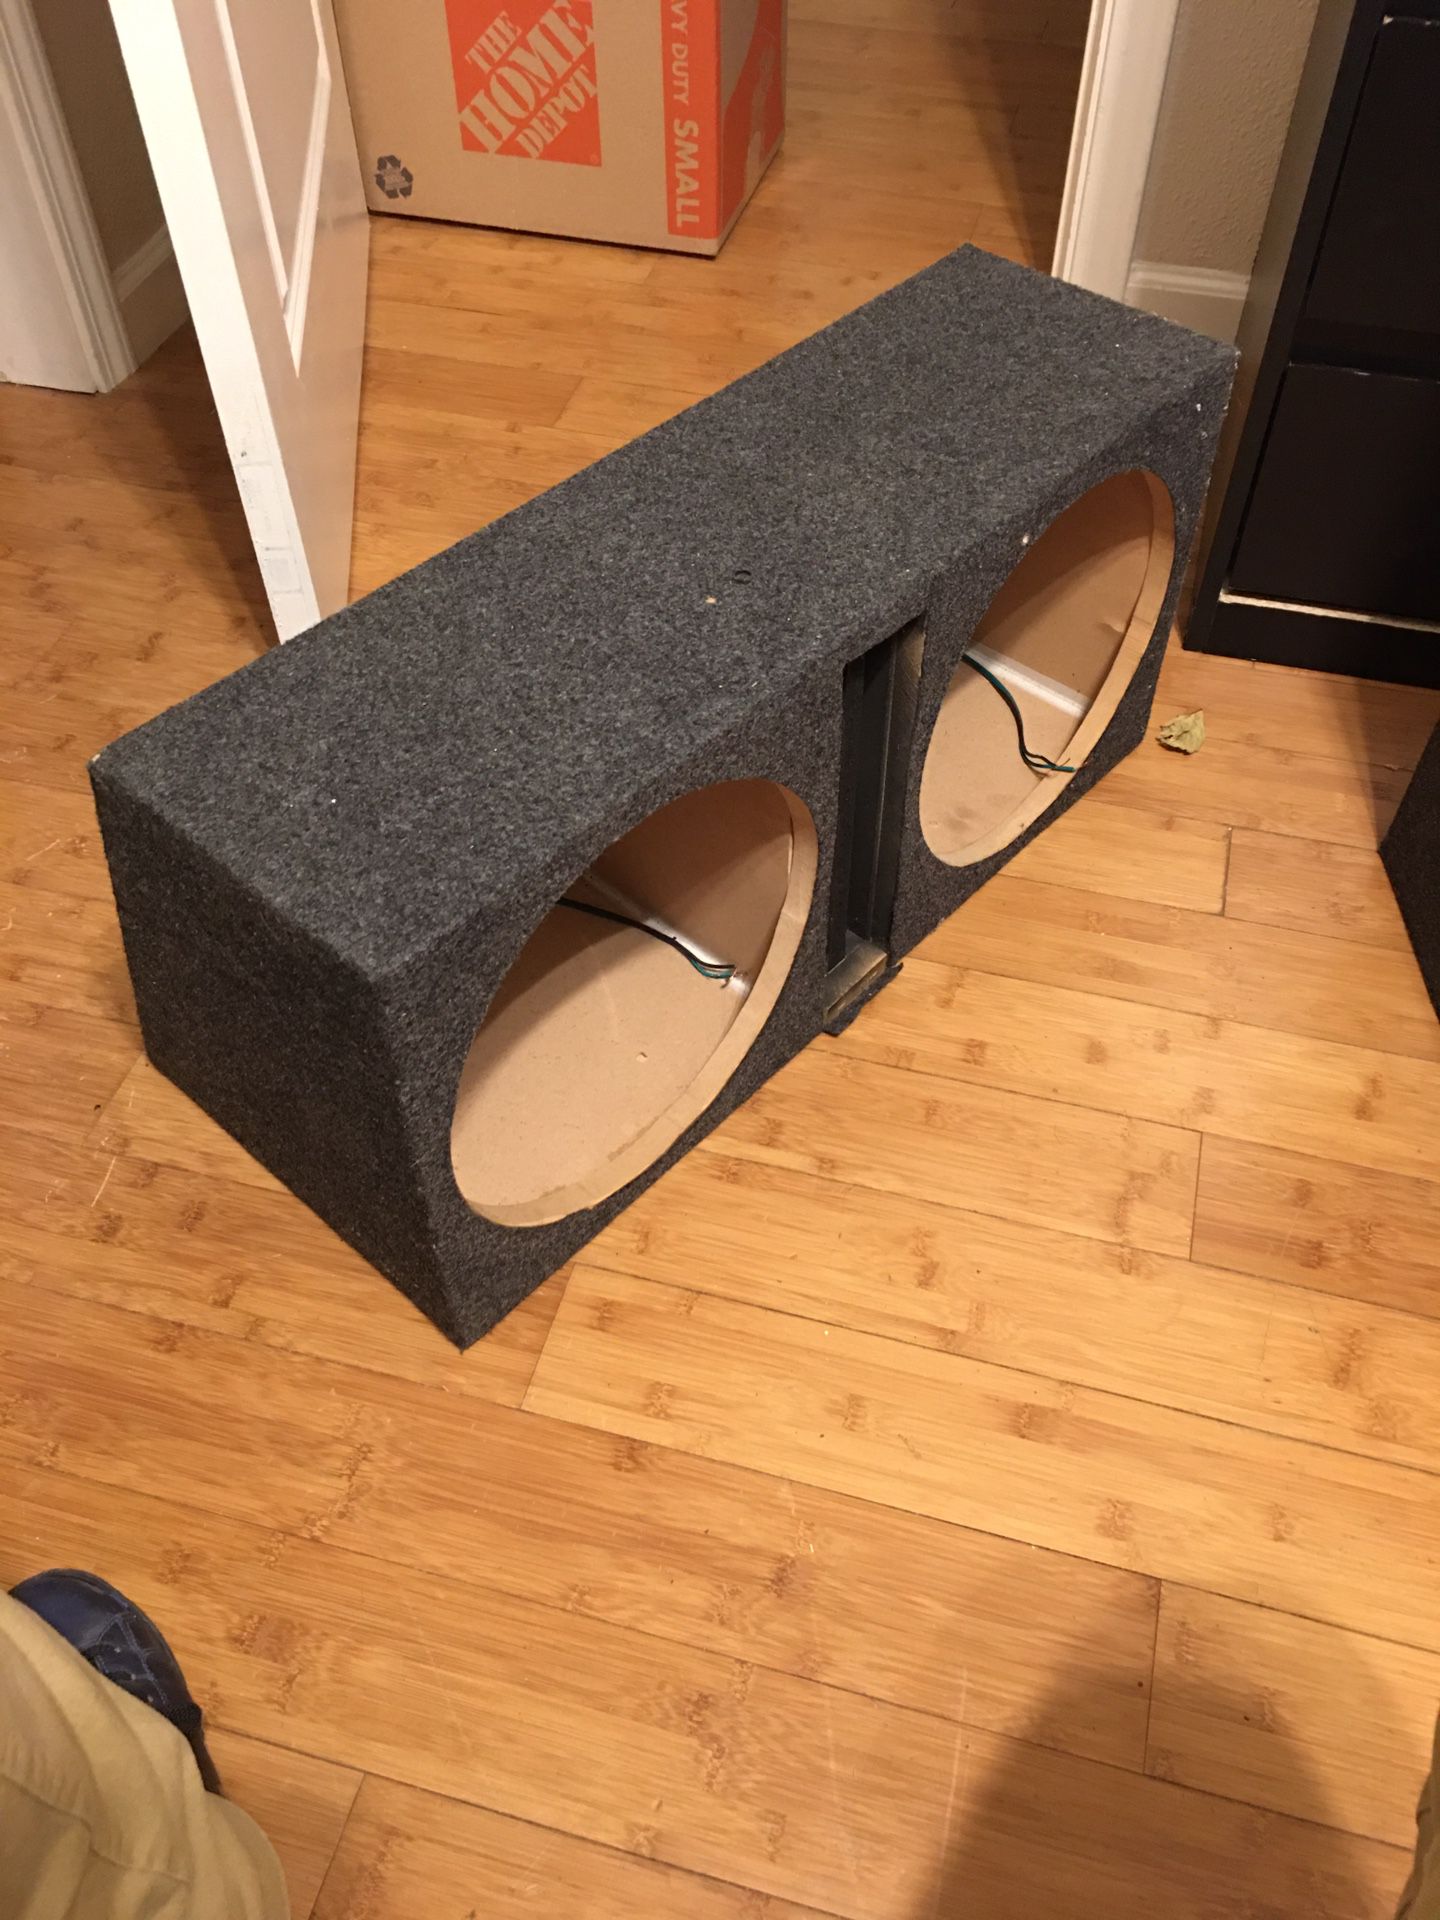 Dual ported subwoofer box for 2 12’s